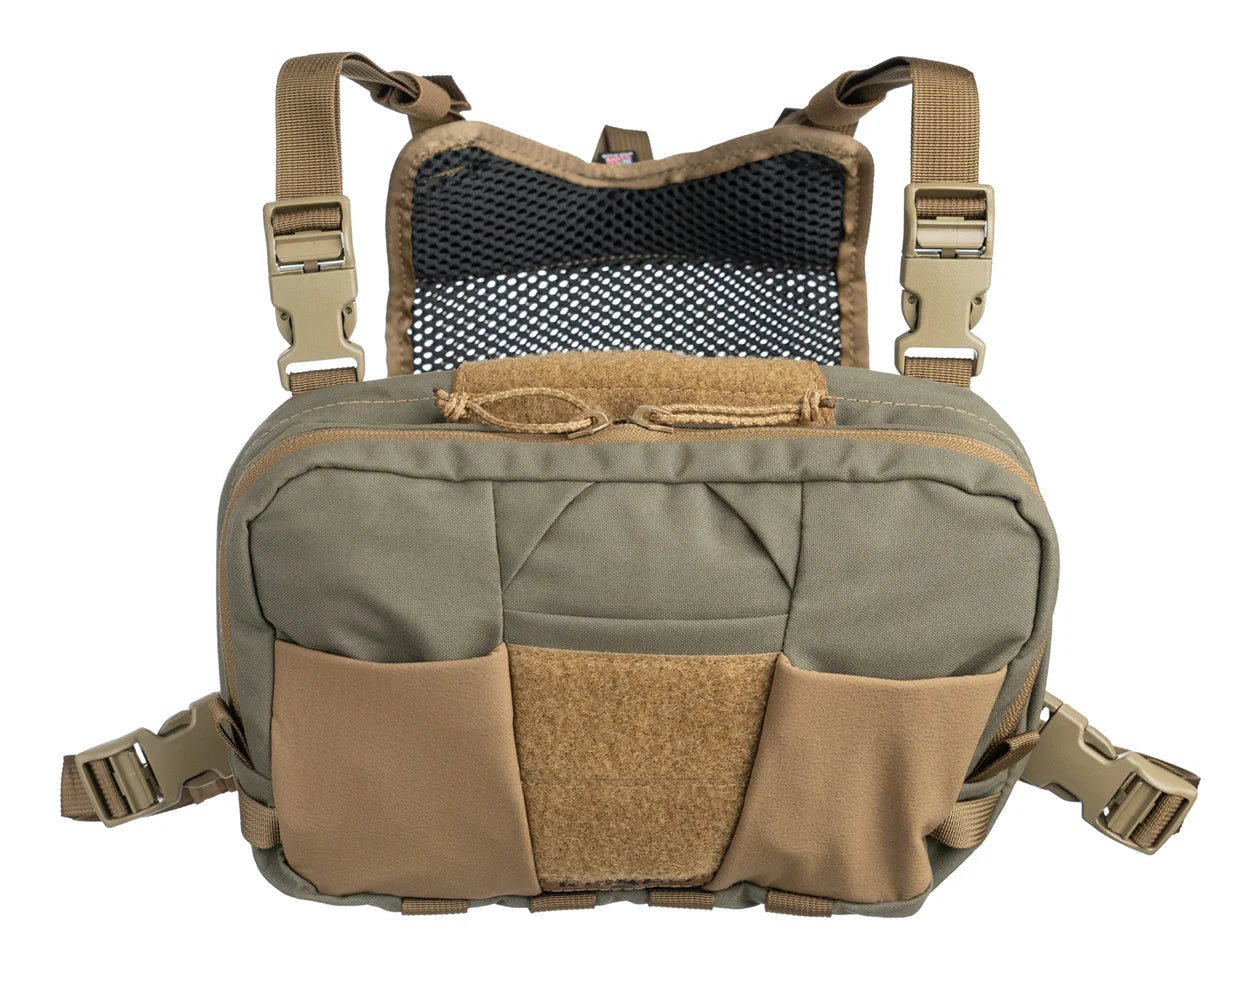 hiking chest pouch online sales,Up To OFF 66%